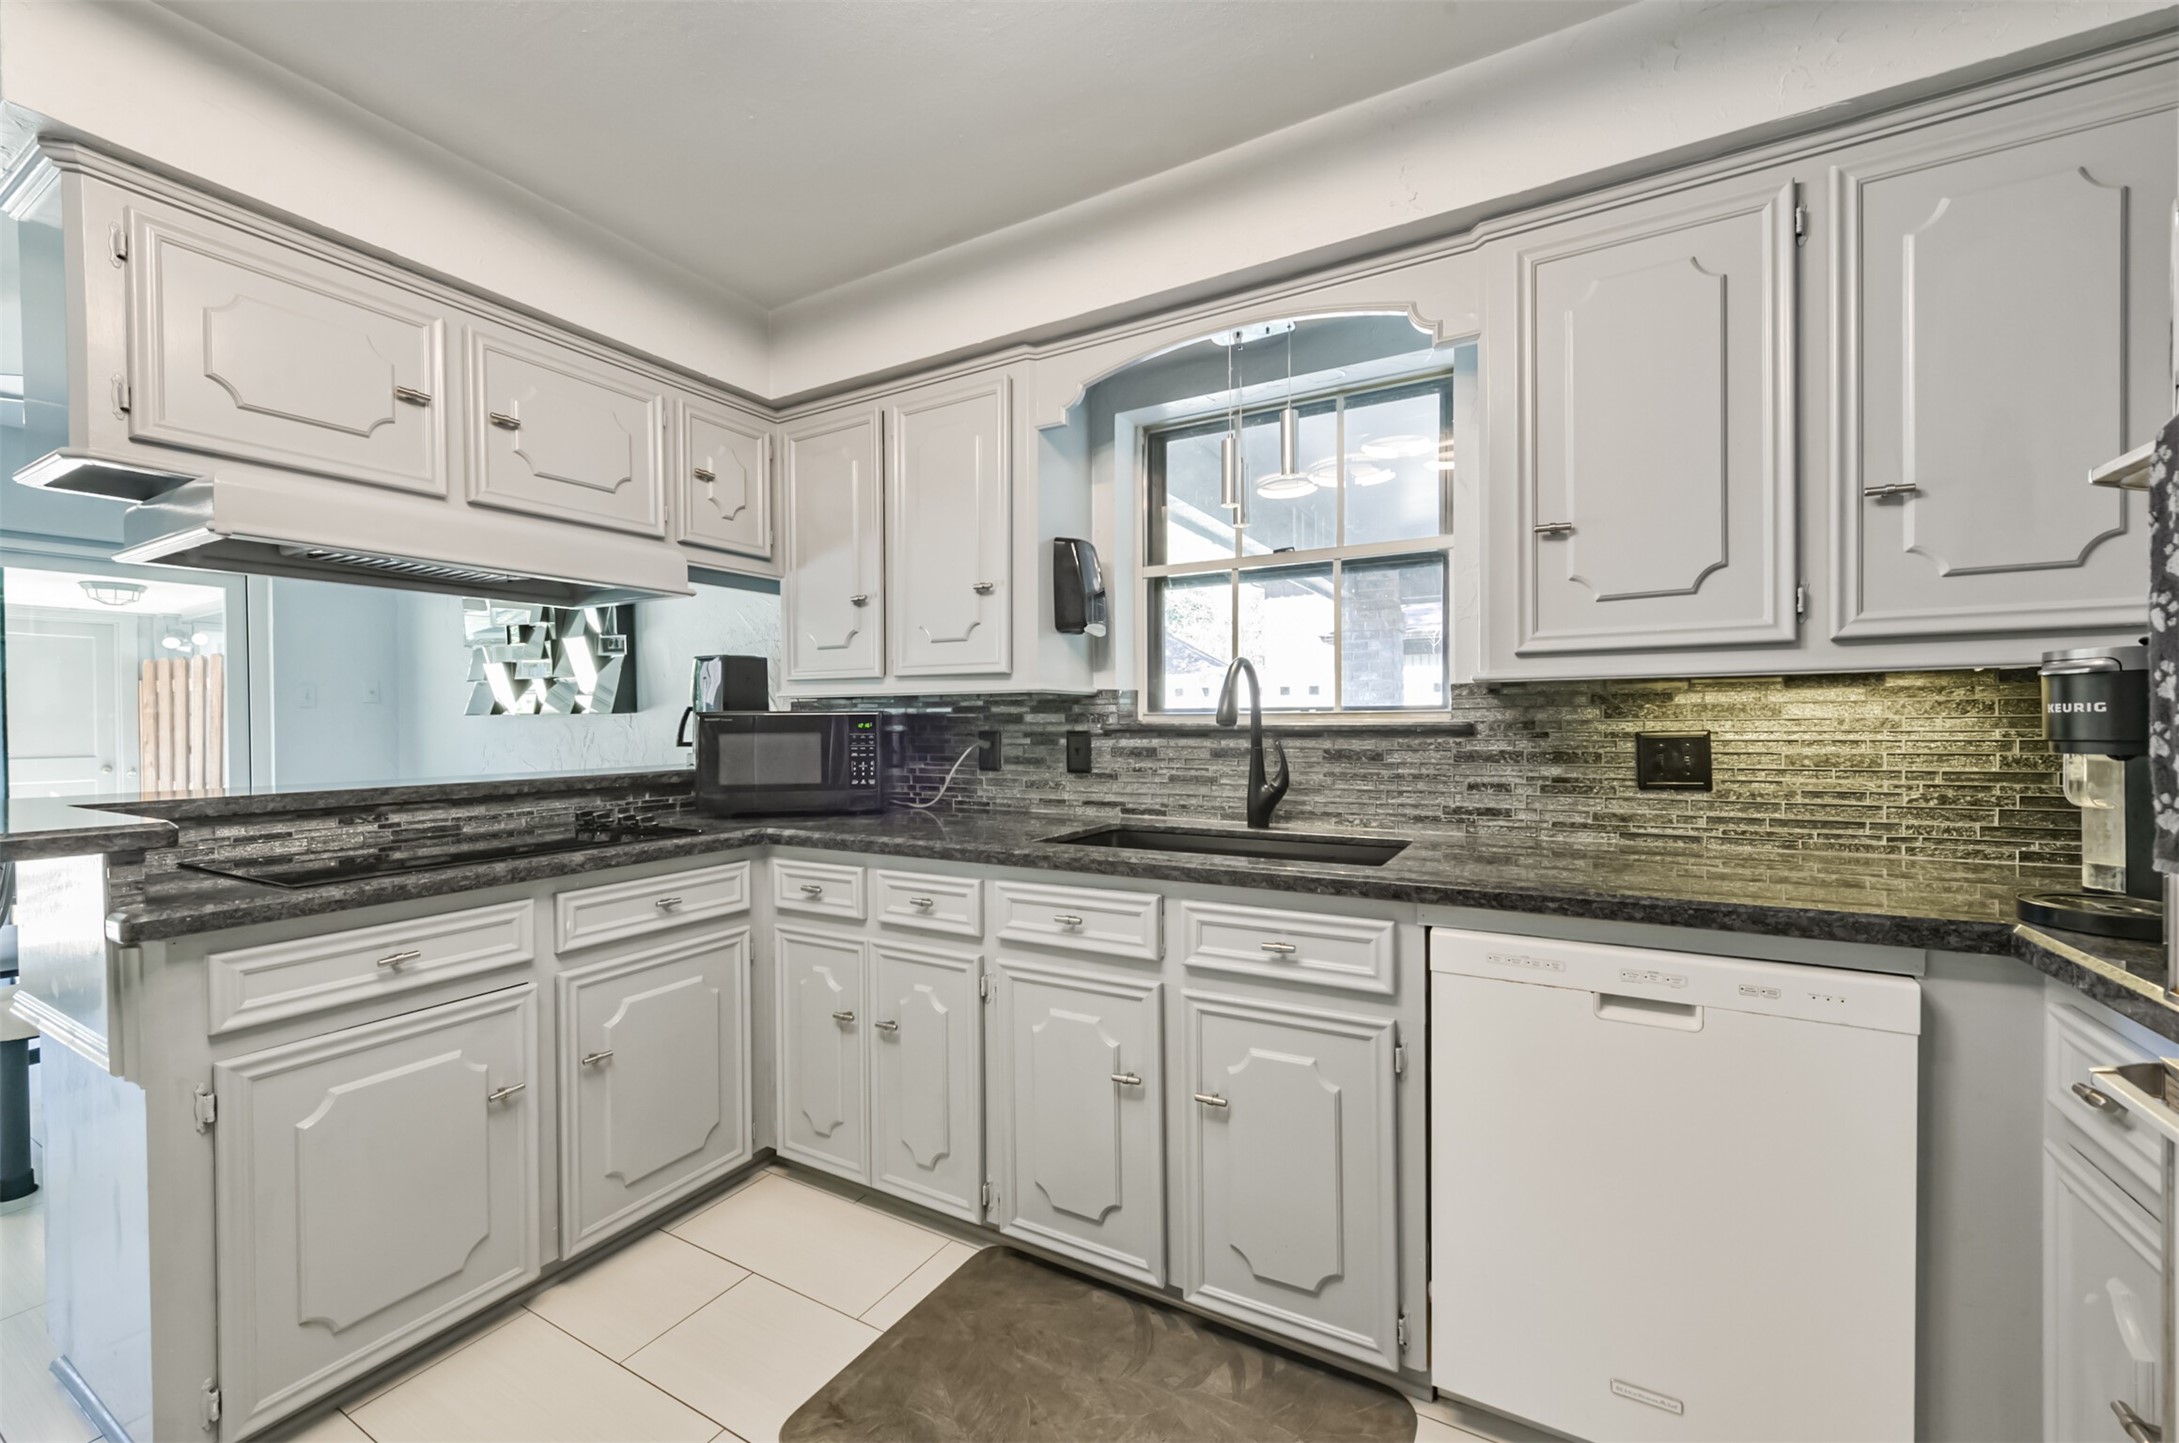 Beautiful granite, nice back splash and painted cabinets make for a dramatic kitchen.